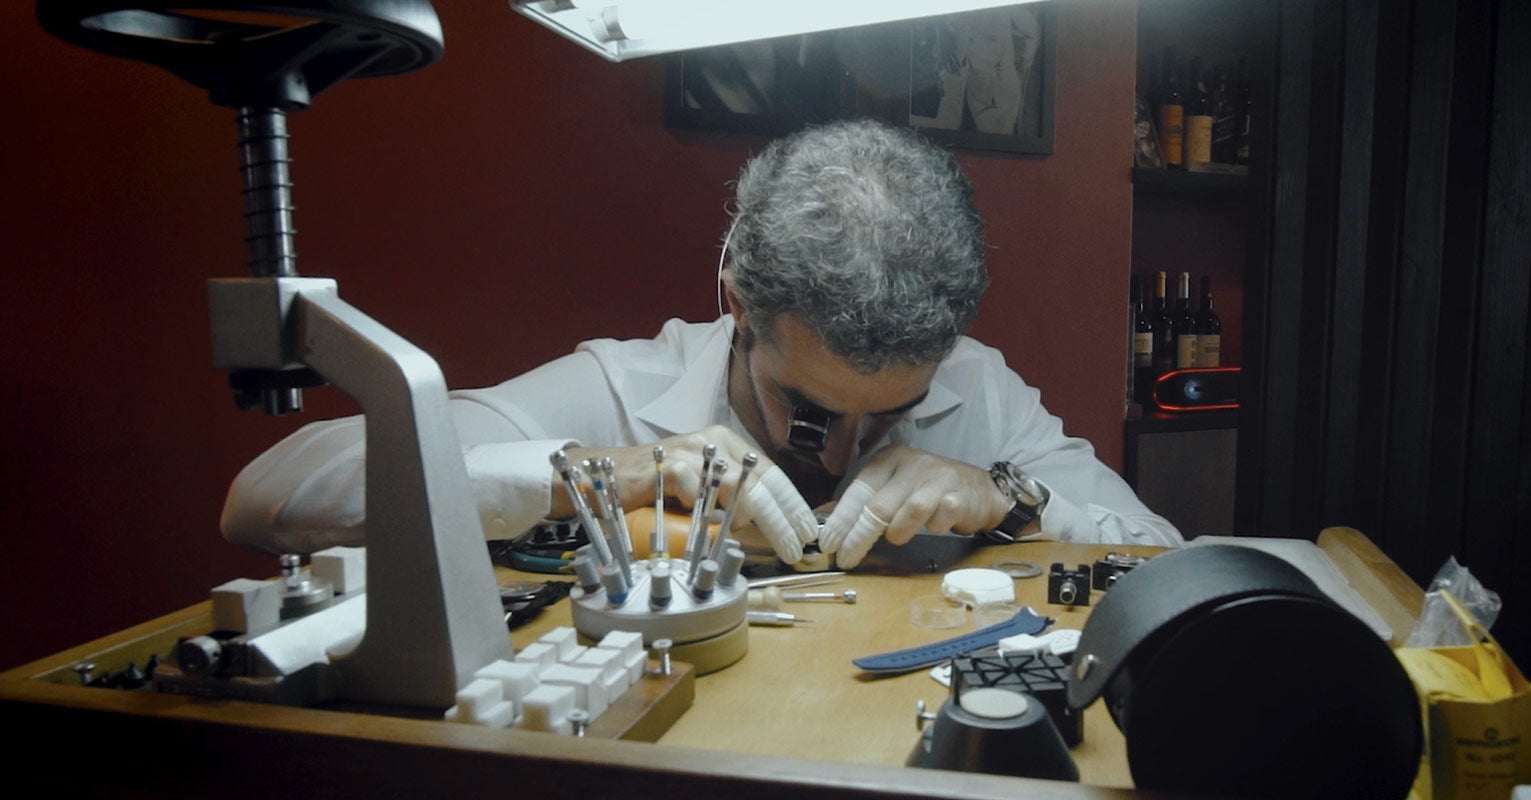 DWISS founder and desginer Rafael Simoes Miranda working on the watchmaking bench for the world's first watch design clue